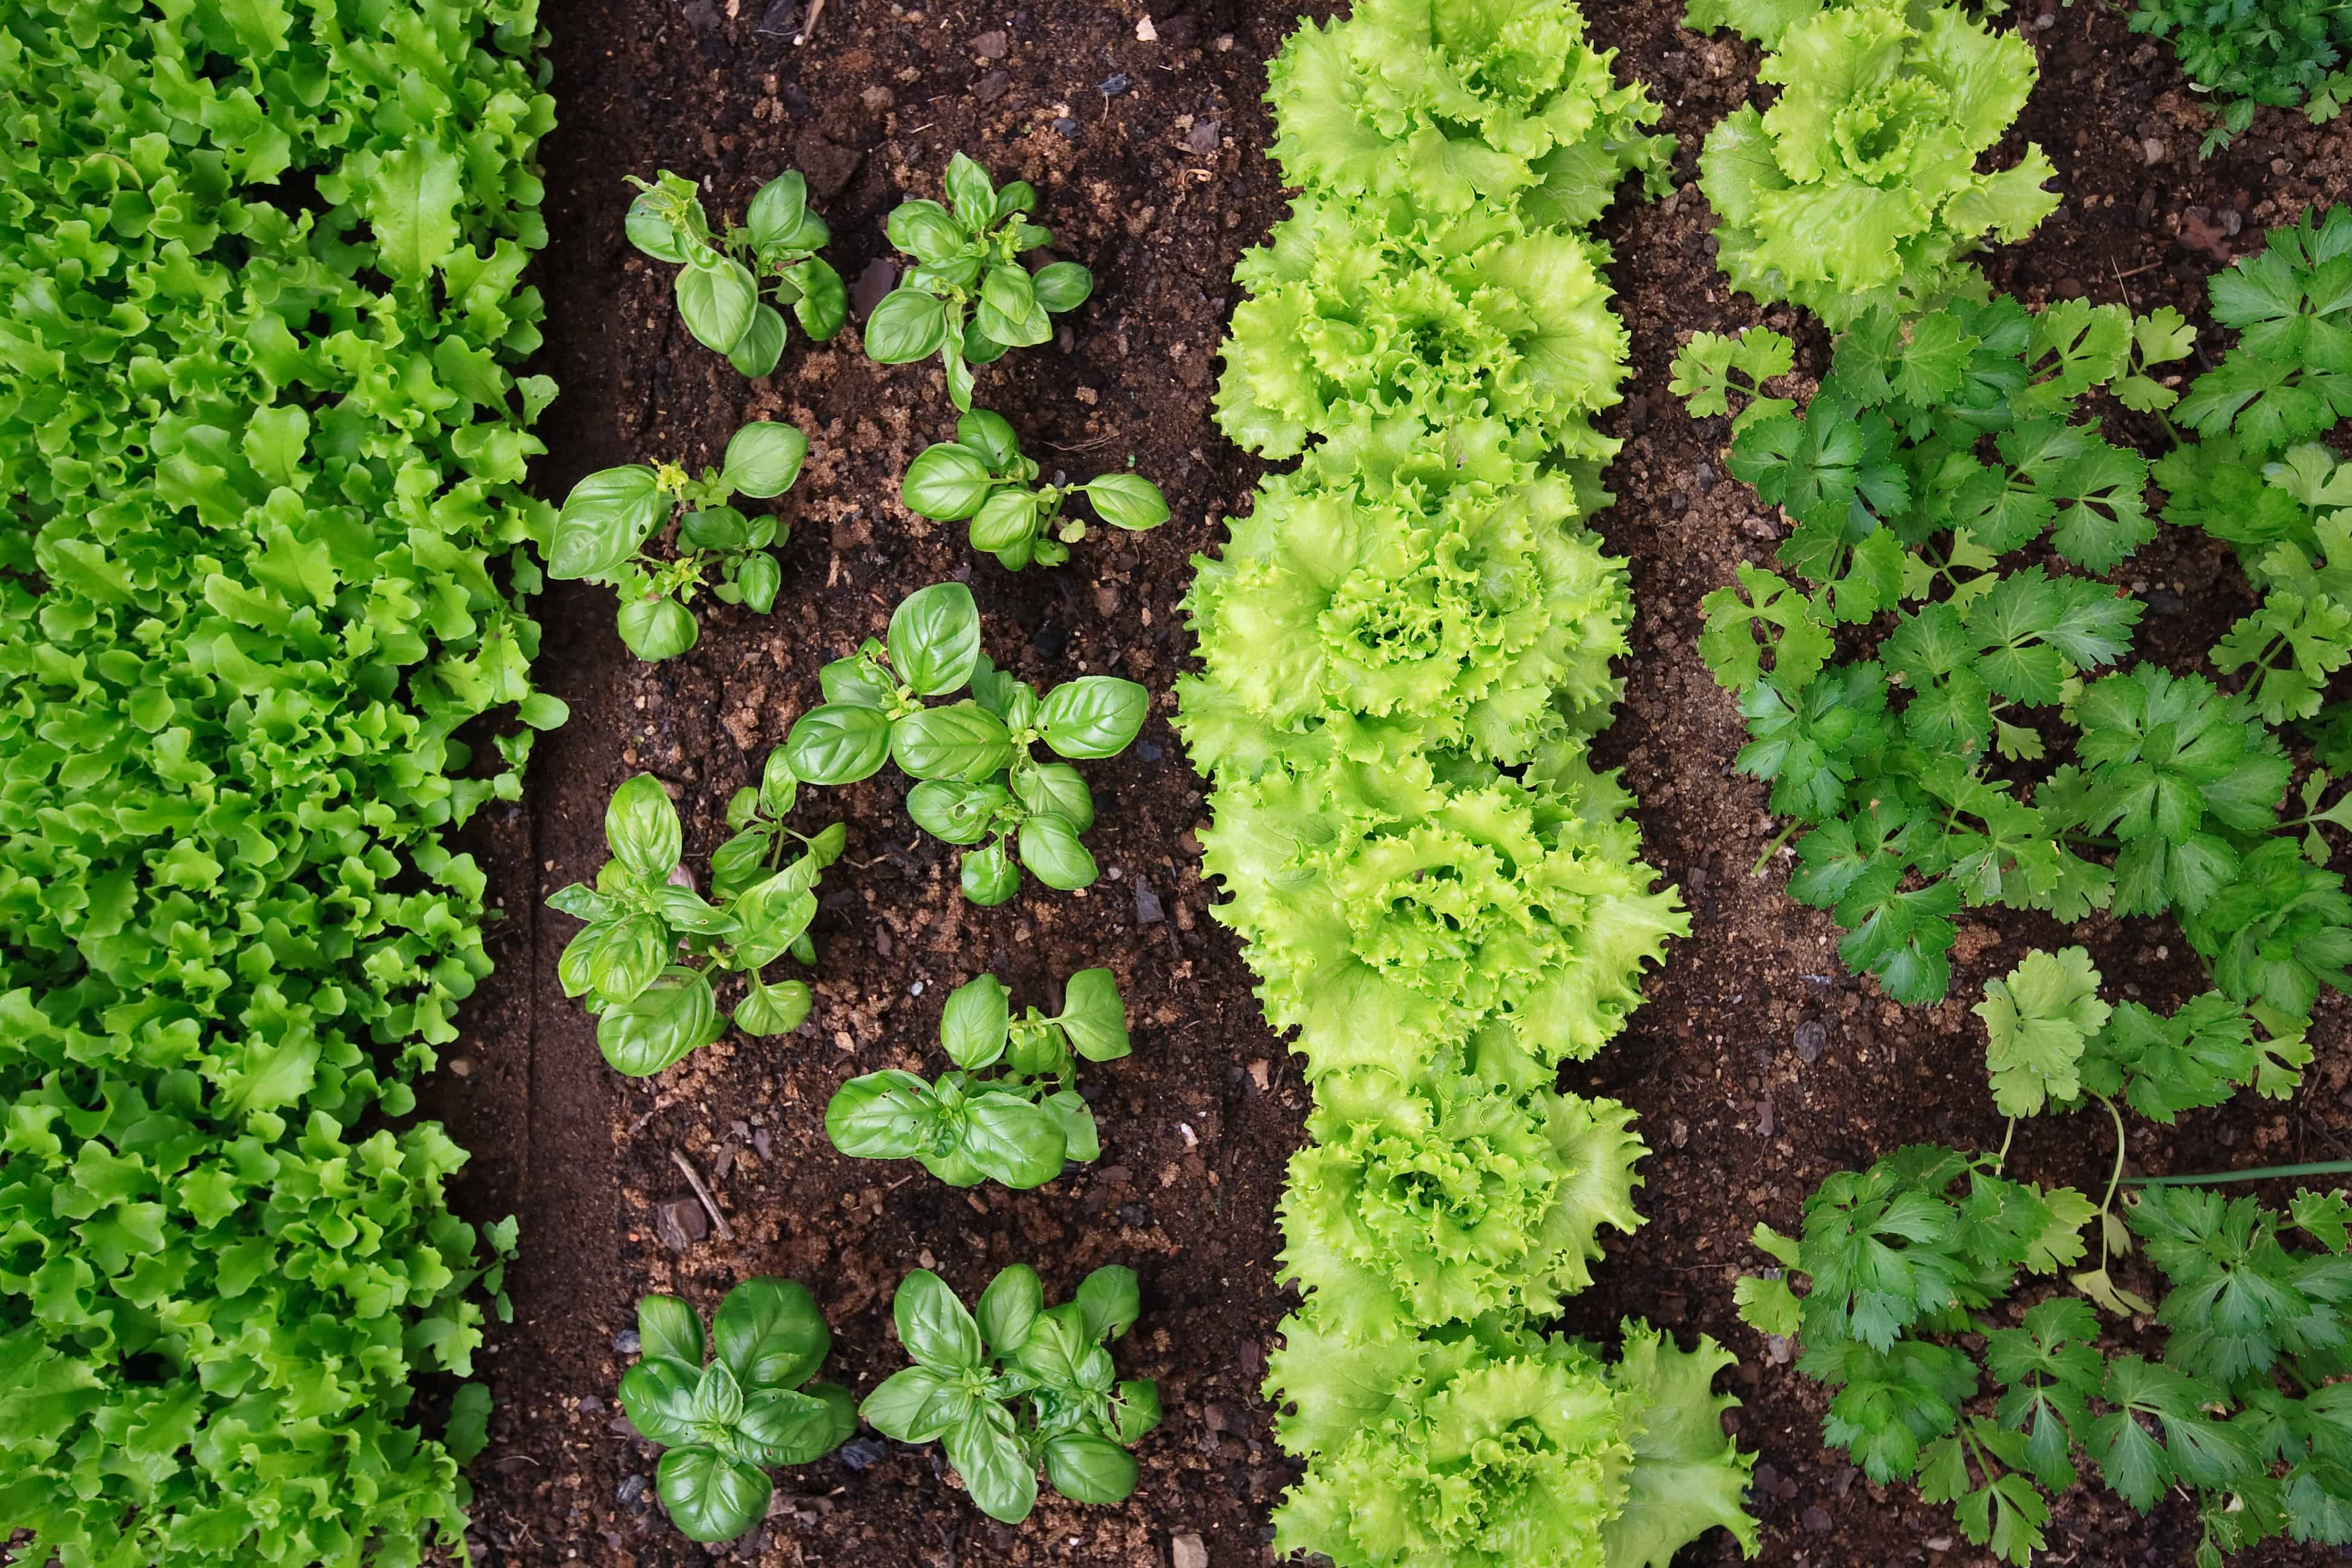 Square Foot Gardening - How Does Companion Planting Work? - One